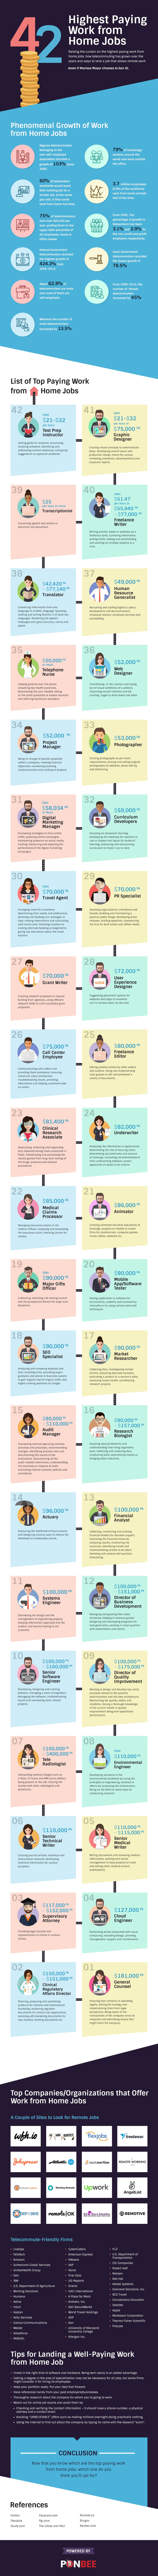 work from home infographic